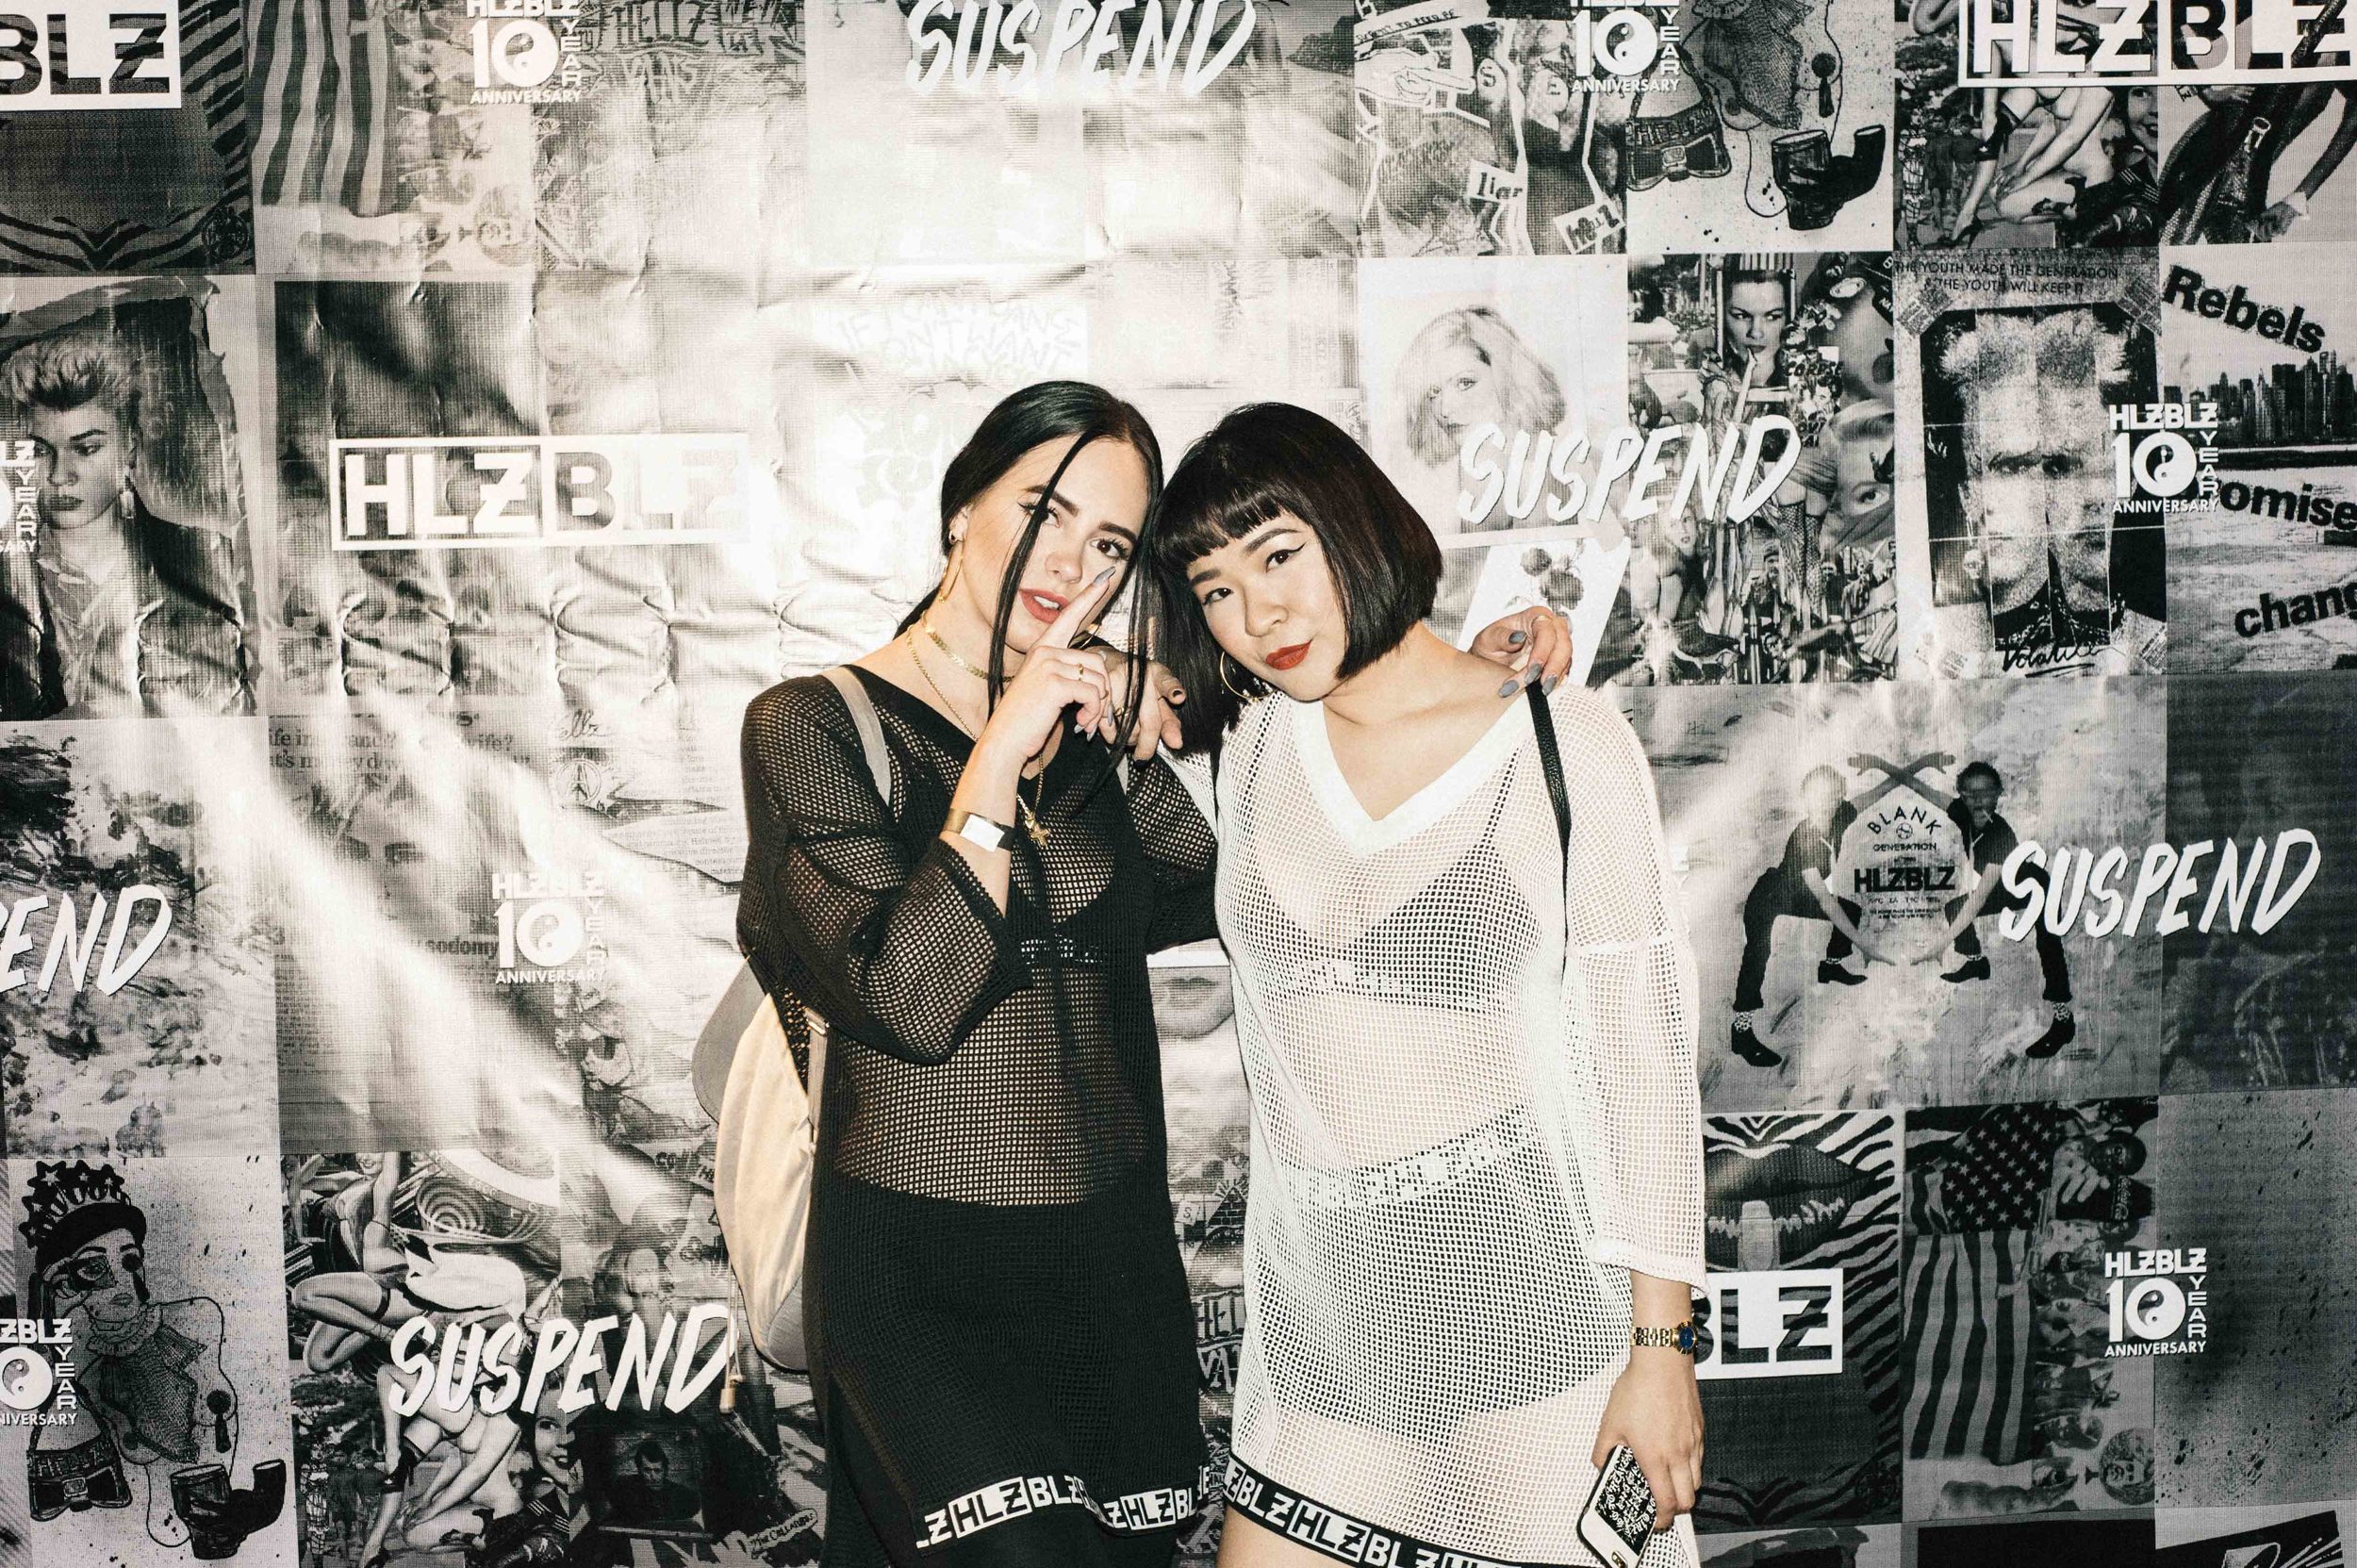  Tina and Ashley Chen of HLZBLZ at the ISSUE 06 Launch x HLZBLZ 10Year Anniversary (Feb 11) at Globe Theater. / Photo: © Jordan Abapo for SUSPEND Magazine 